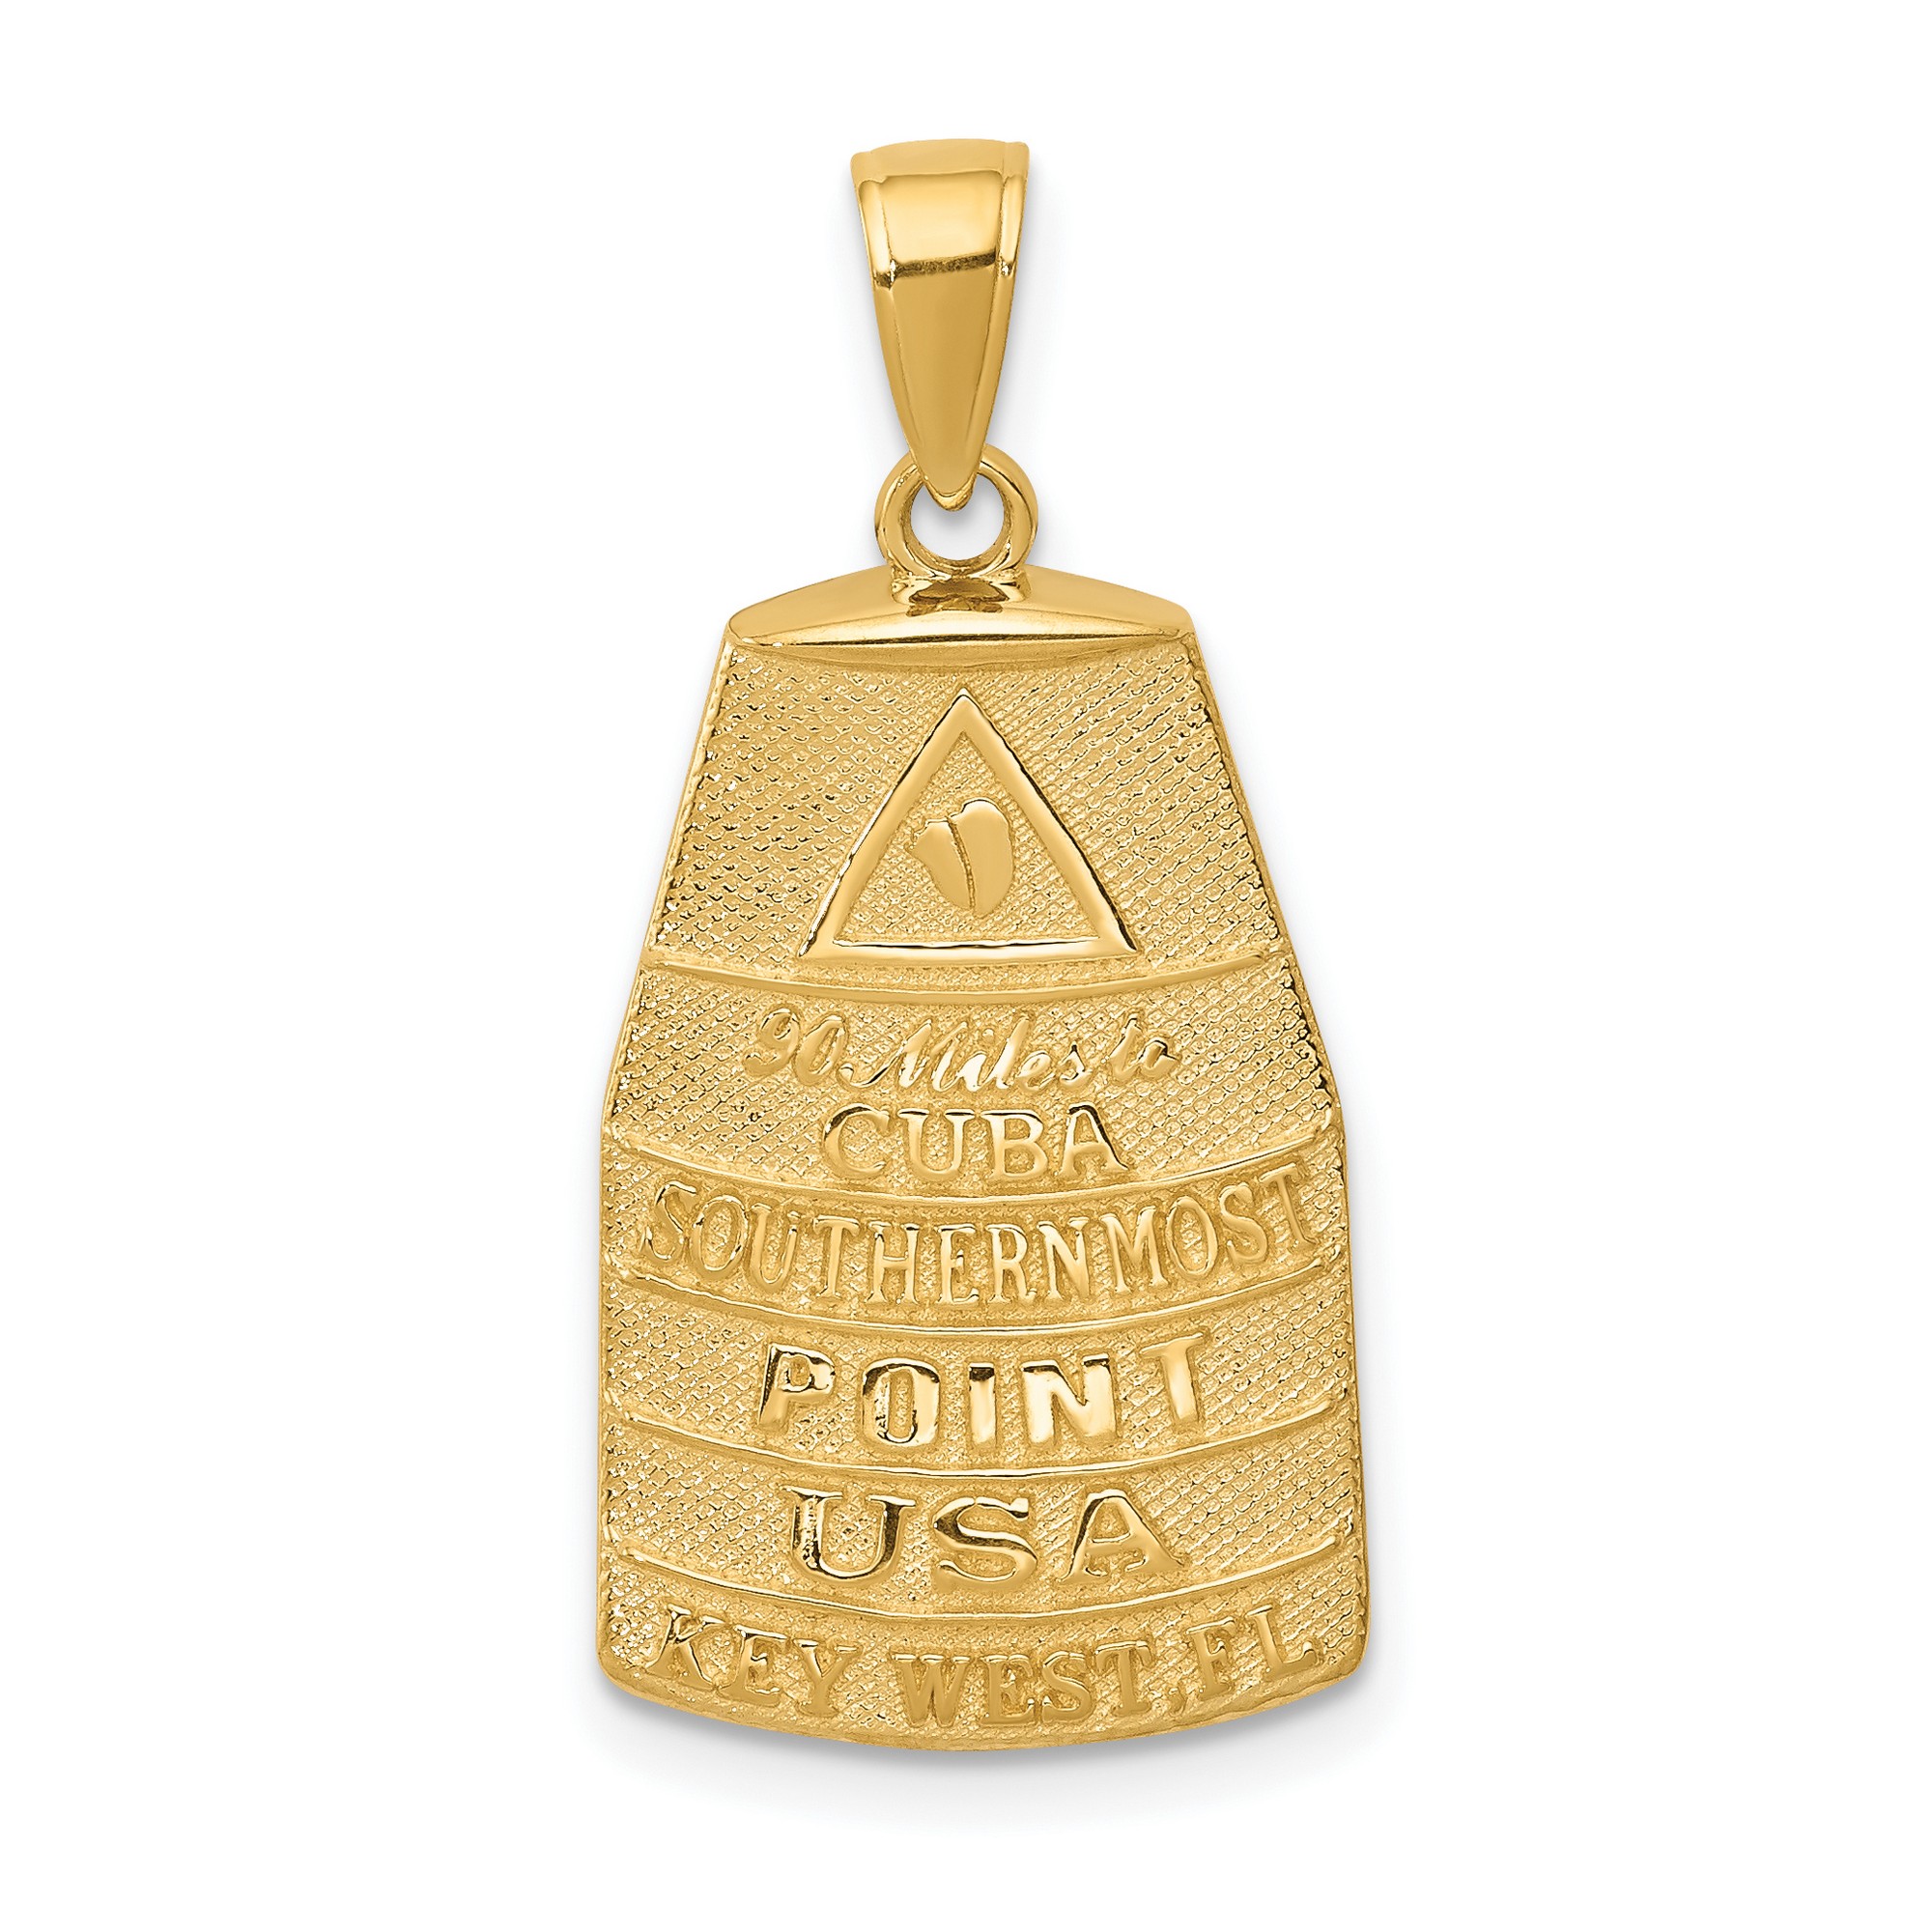 Pre-owned Jewelry Stores Network 14k Yellow Gold 90 Miles To Cuba Southernmost Point Key West Buoy Pendant